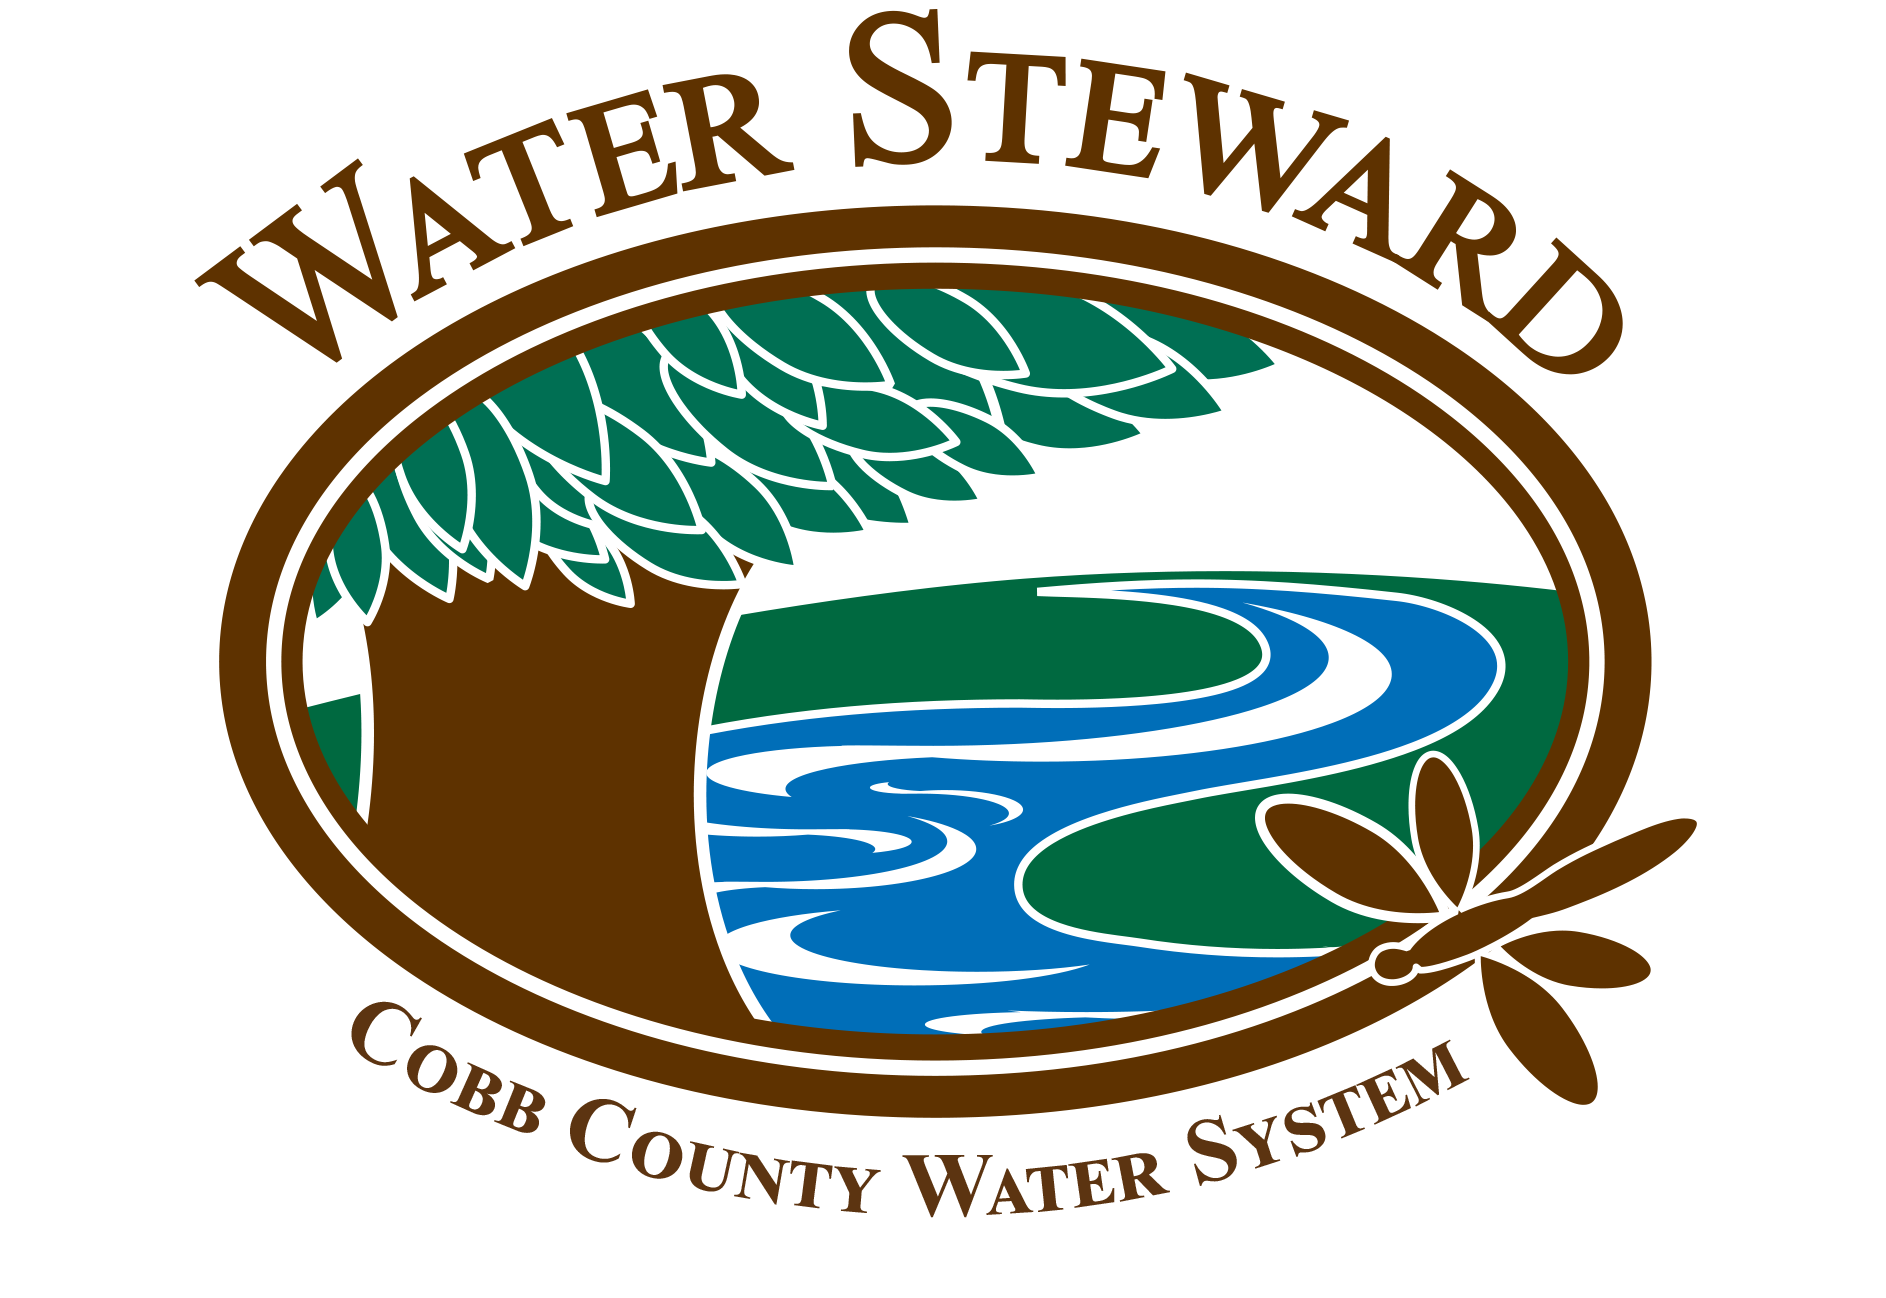 Cobb County Watershed Stewardship